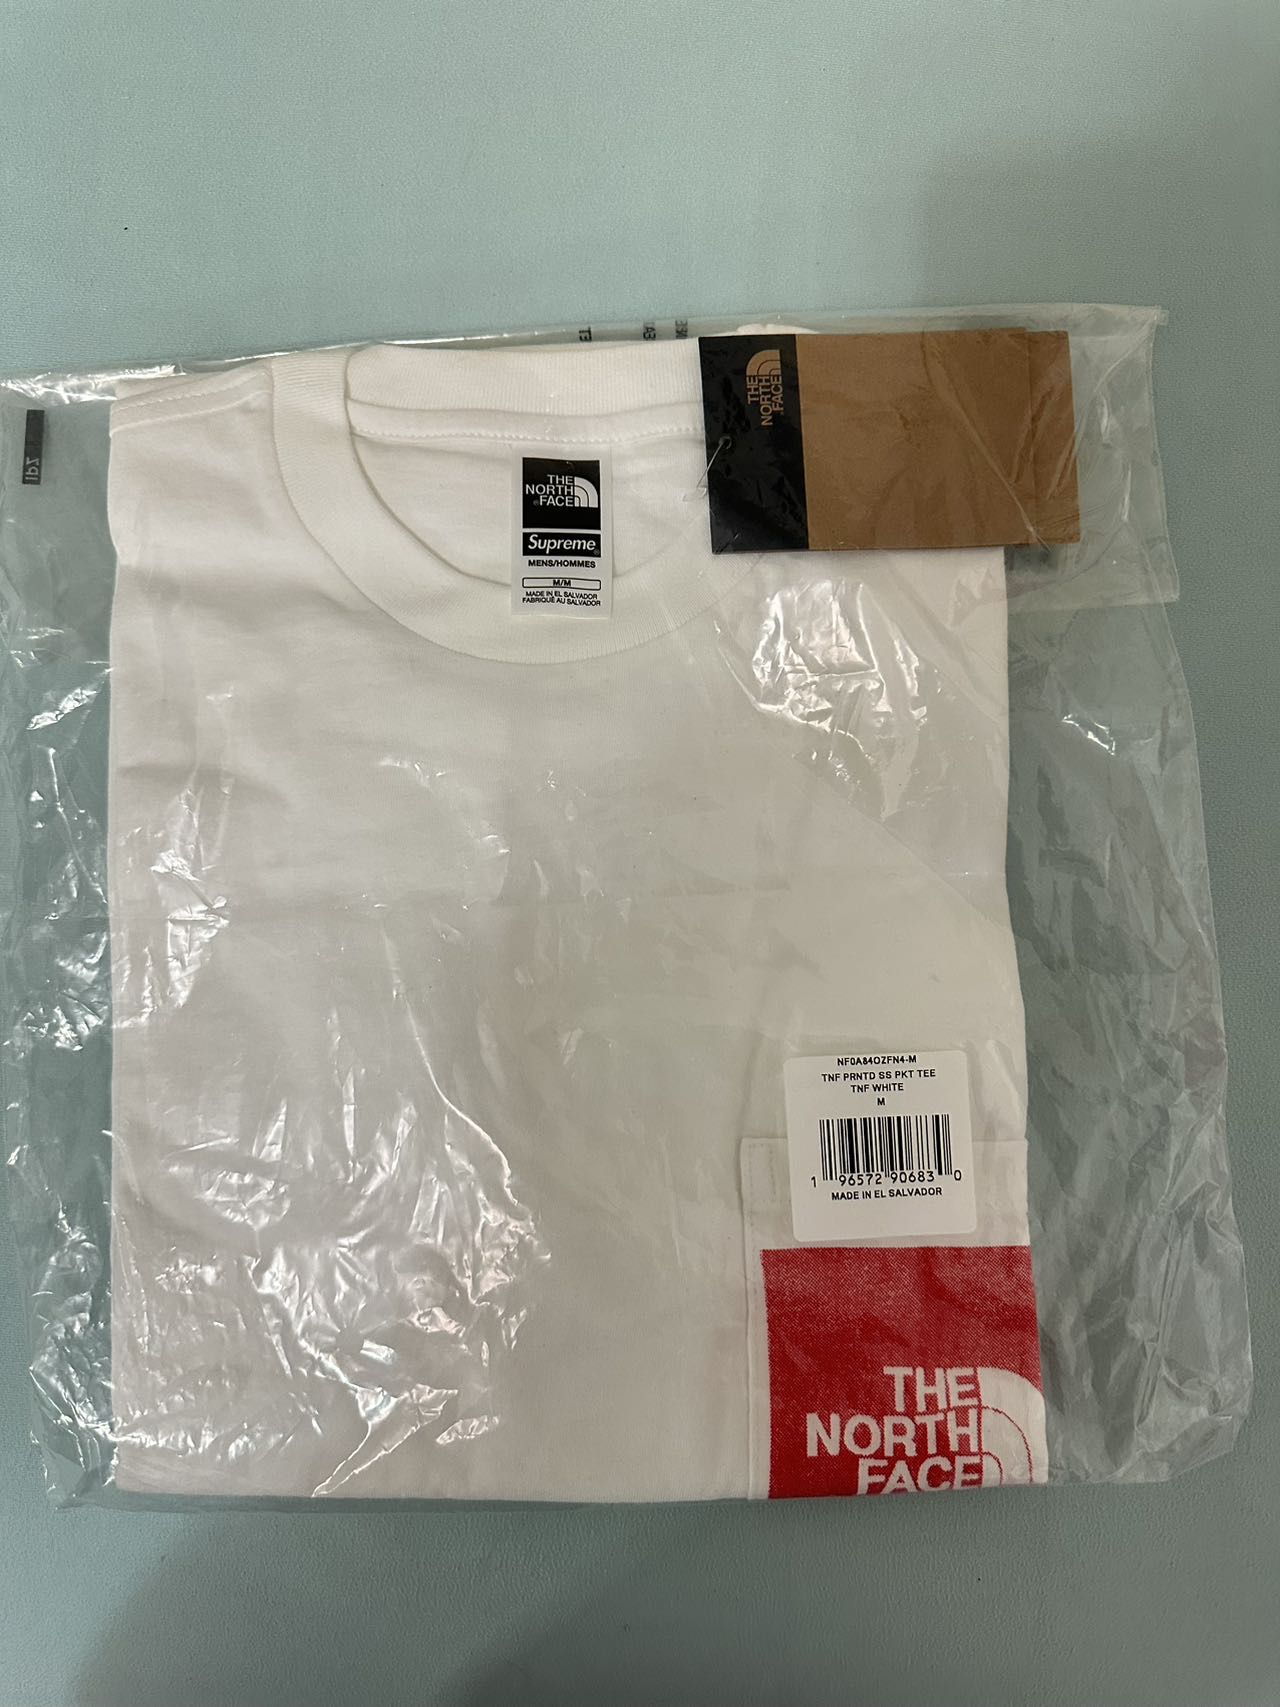 Supreme X The North Face Printed Pocket Tee White Size M for Sale